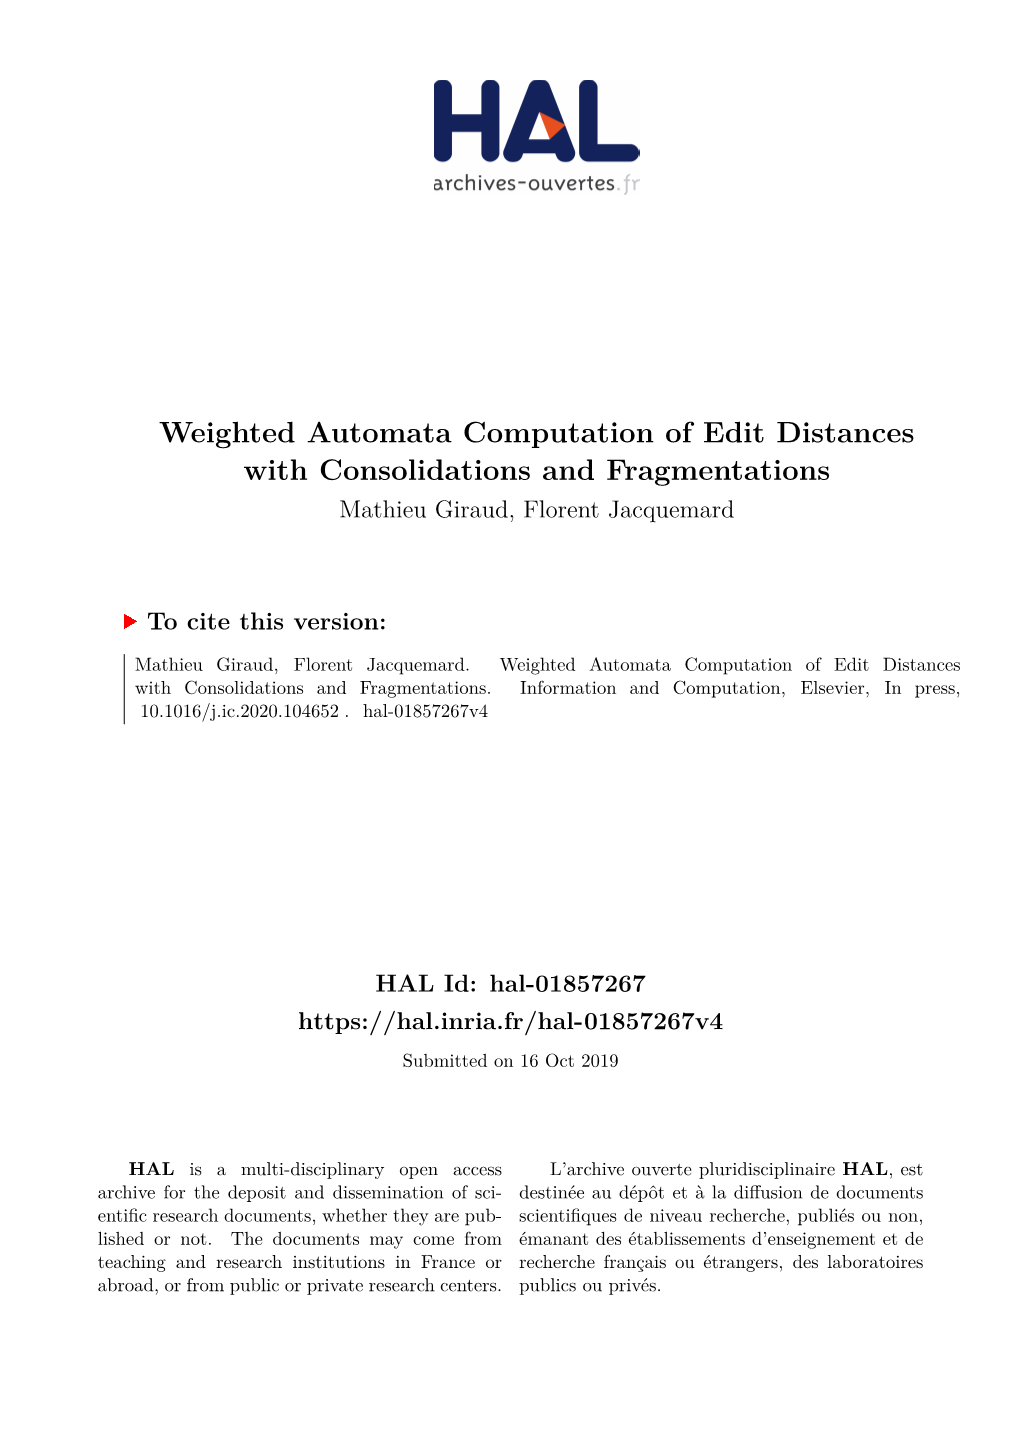 Weighted Automata Computation of Edit Distances with Consolidations and Fragmentations Mathieu Giraud, Florent Jacquemard